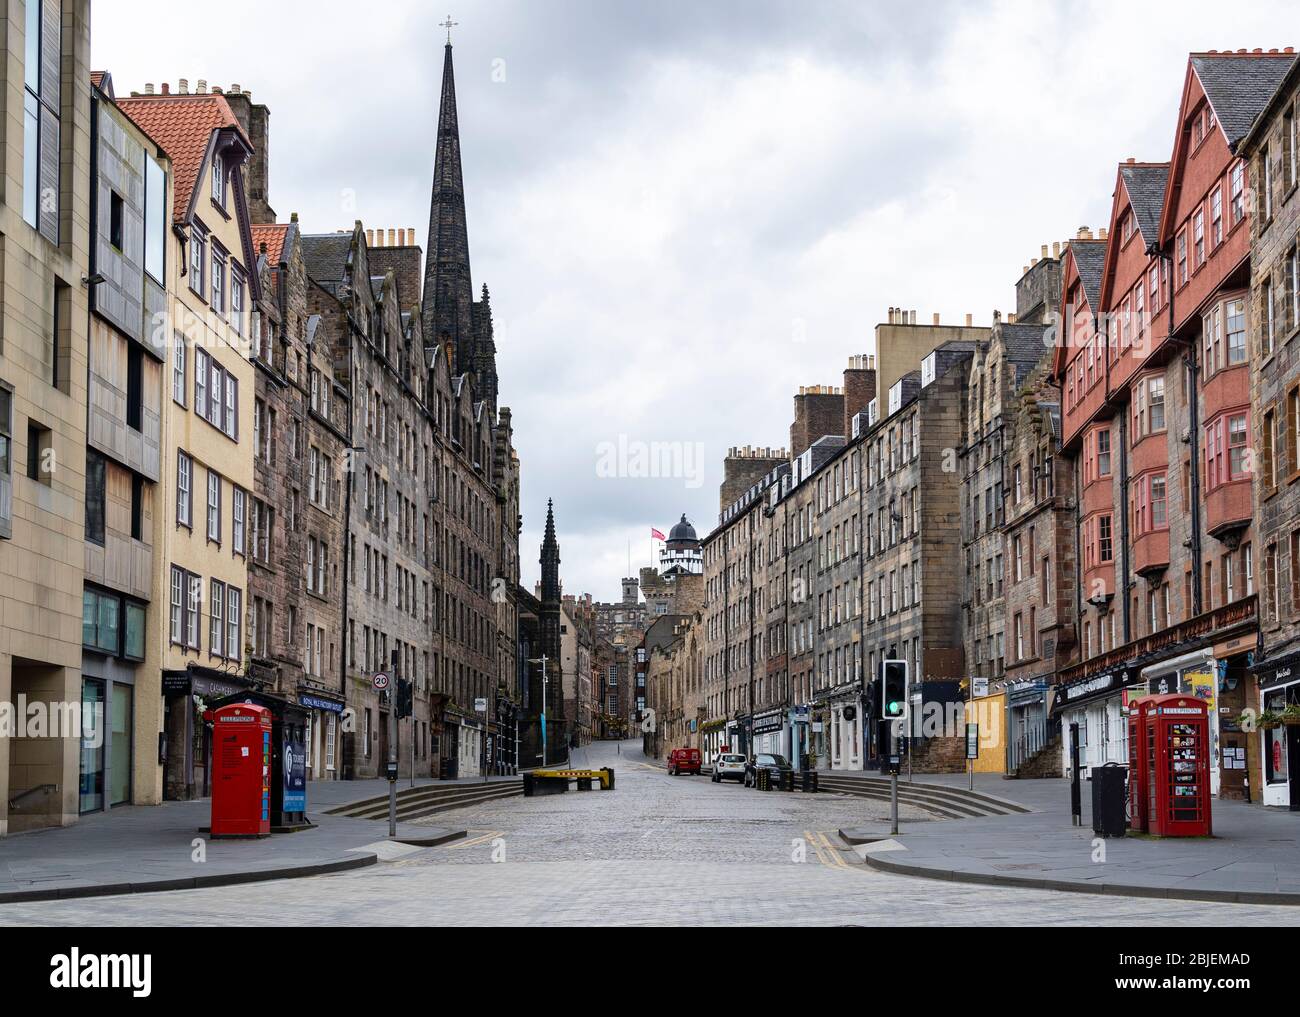 Edinburgh, Scotland, UK. 29 April 2020. Views of Edinburgh Old Town as coronavirus lockdown continues in Scotland. Streets remain deserted and shops and restaurants closed and many boarded up. Scottish Government now recommends public to wear face masks. A deserted Royal Mile at Lawnmarket. Stock Photo